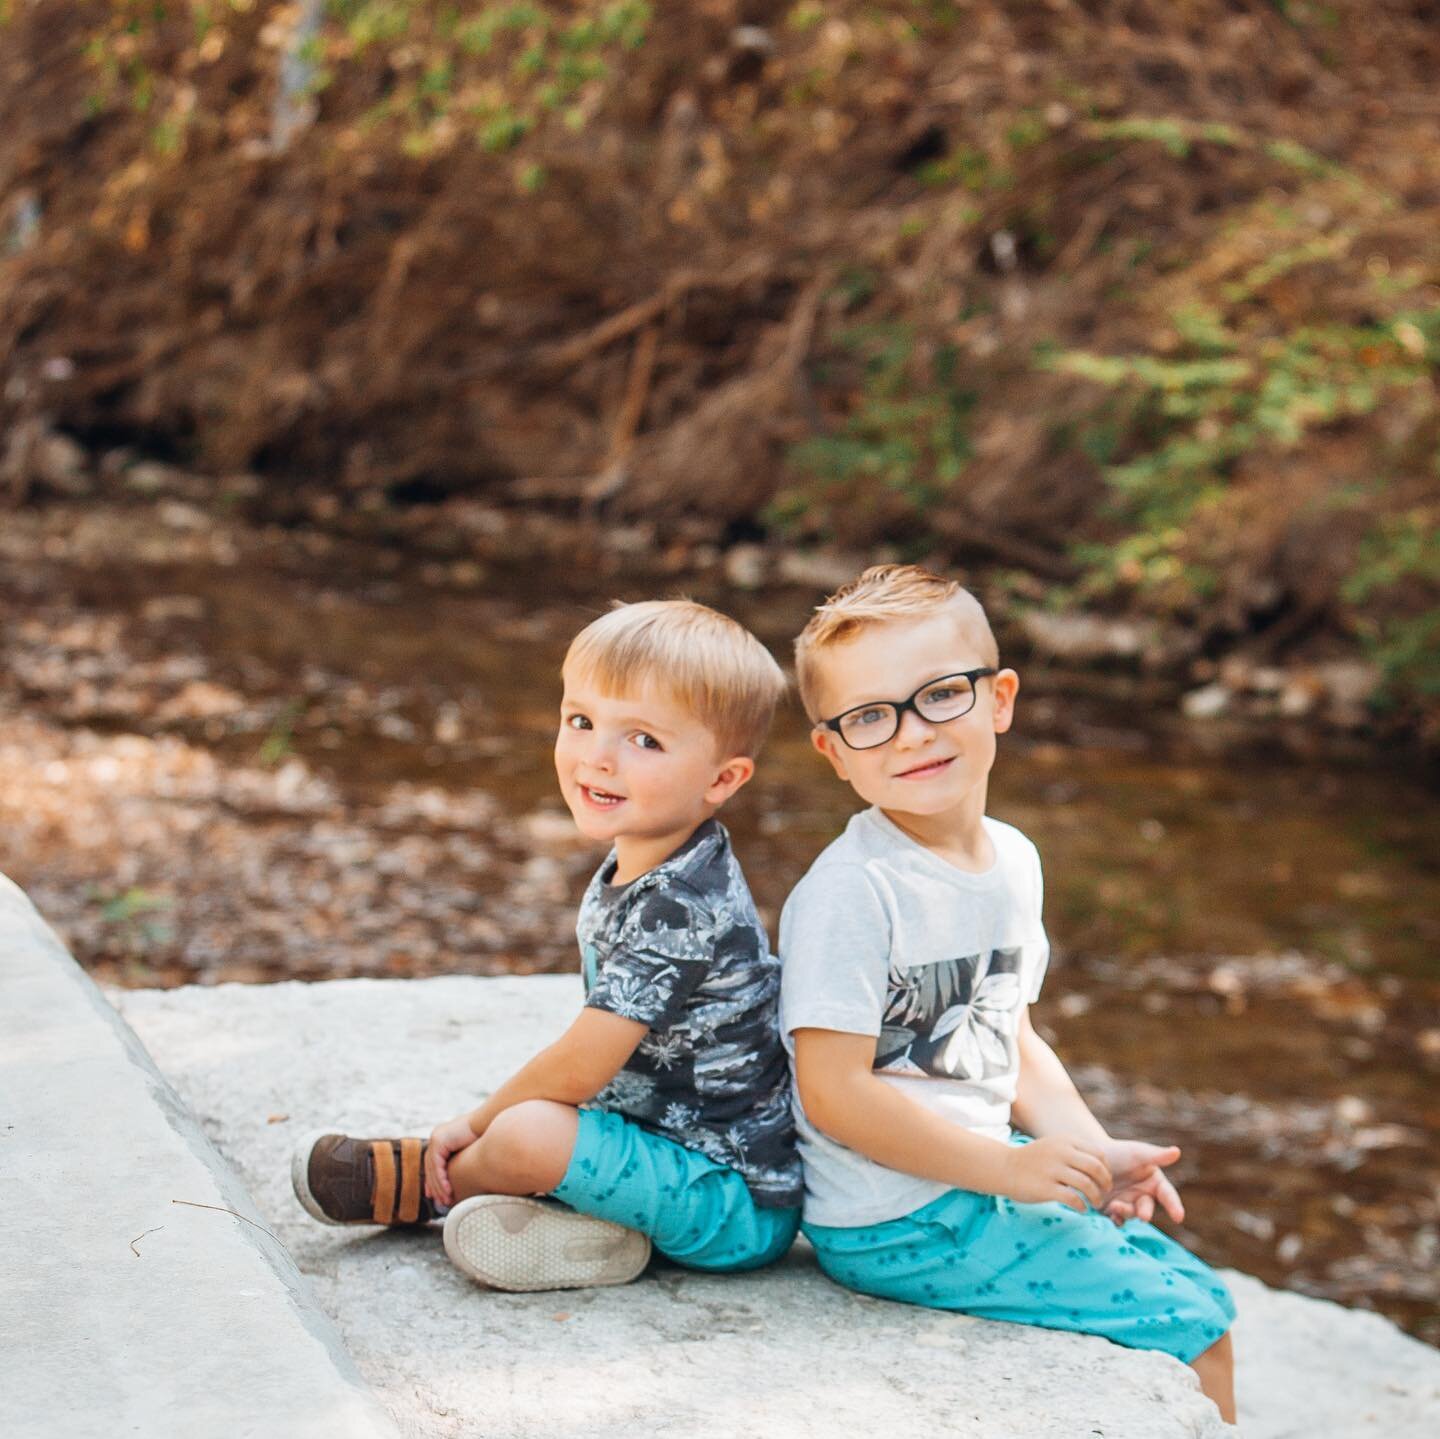 This brother duo is my favorite!🤍
.
.
.
#brothers #familyphotographer #airfieldfalls #childrenphotography #fortworthfamilyphotography